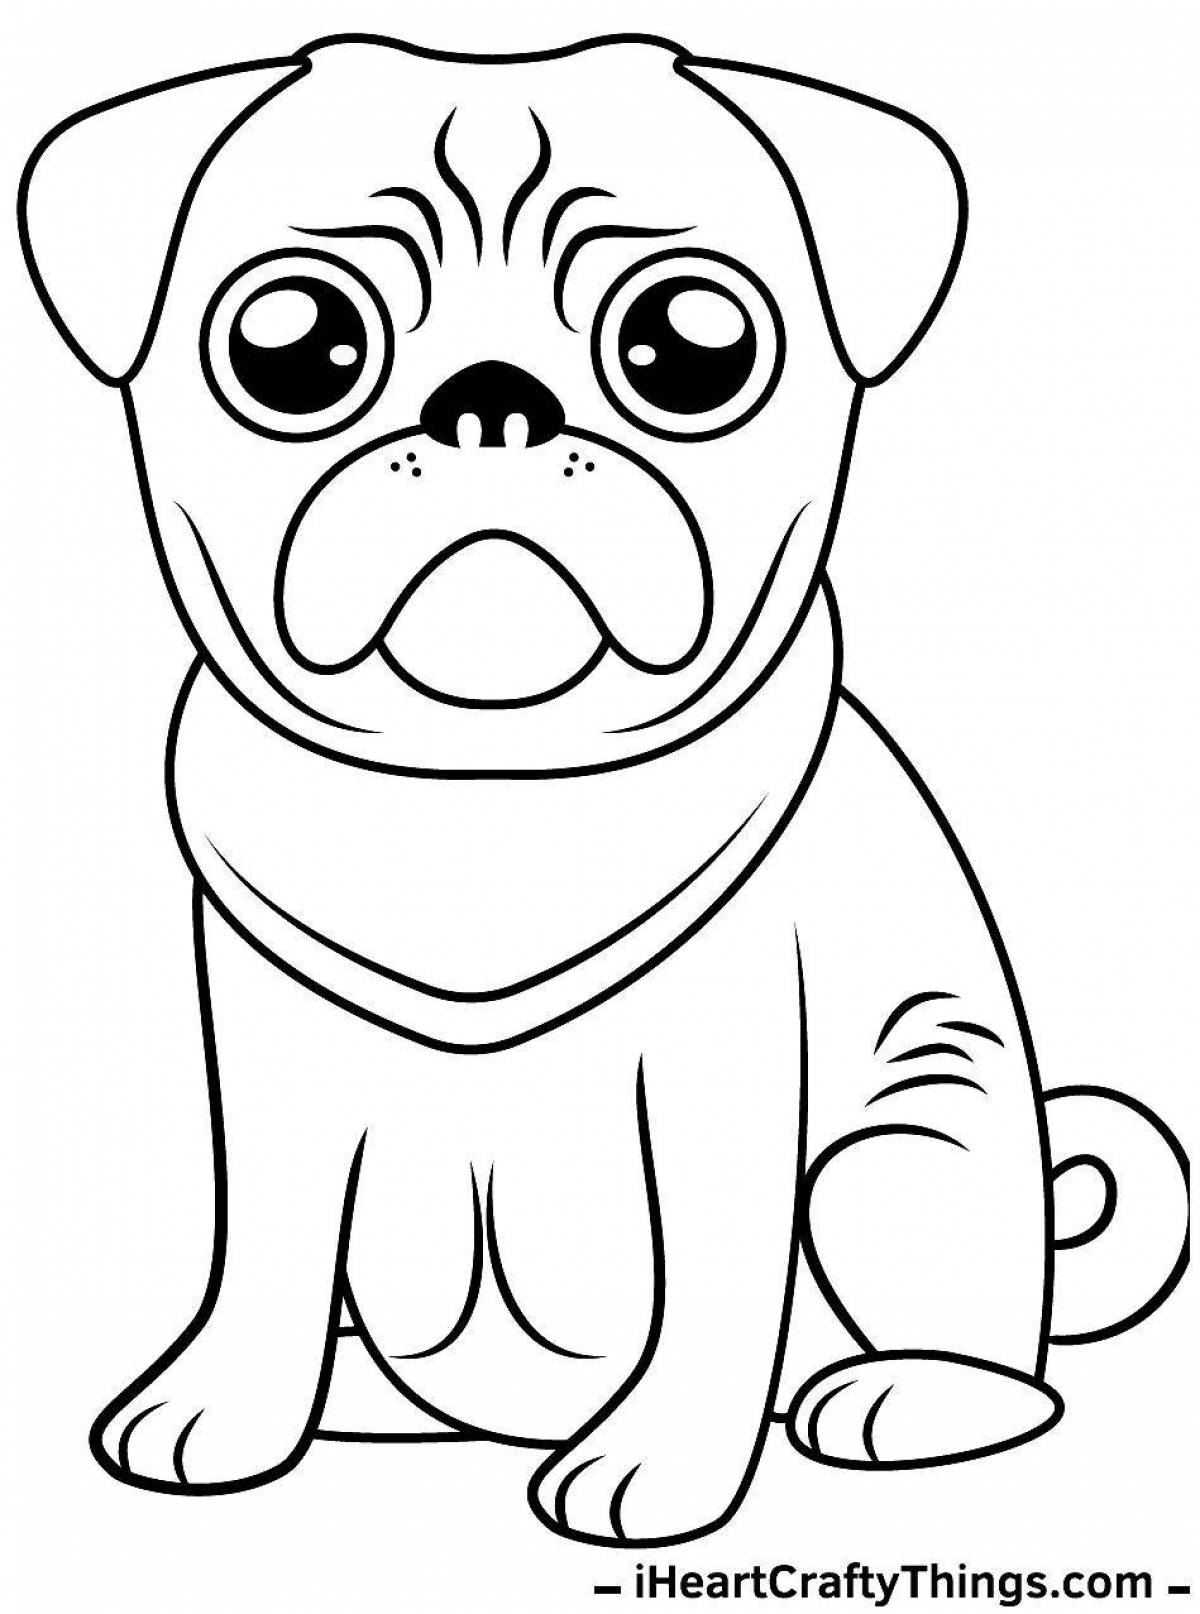 Exciting pug Christmas coloring book